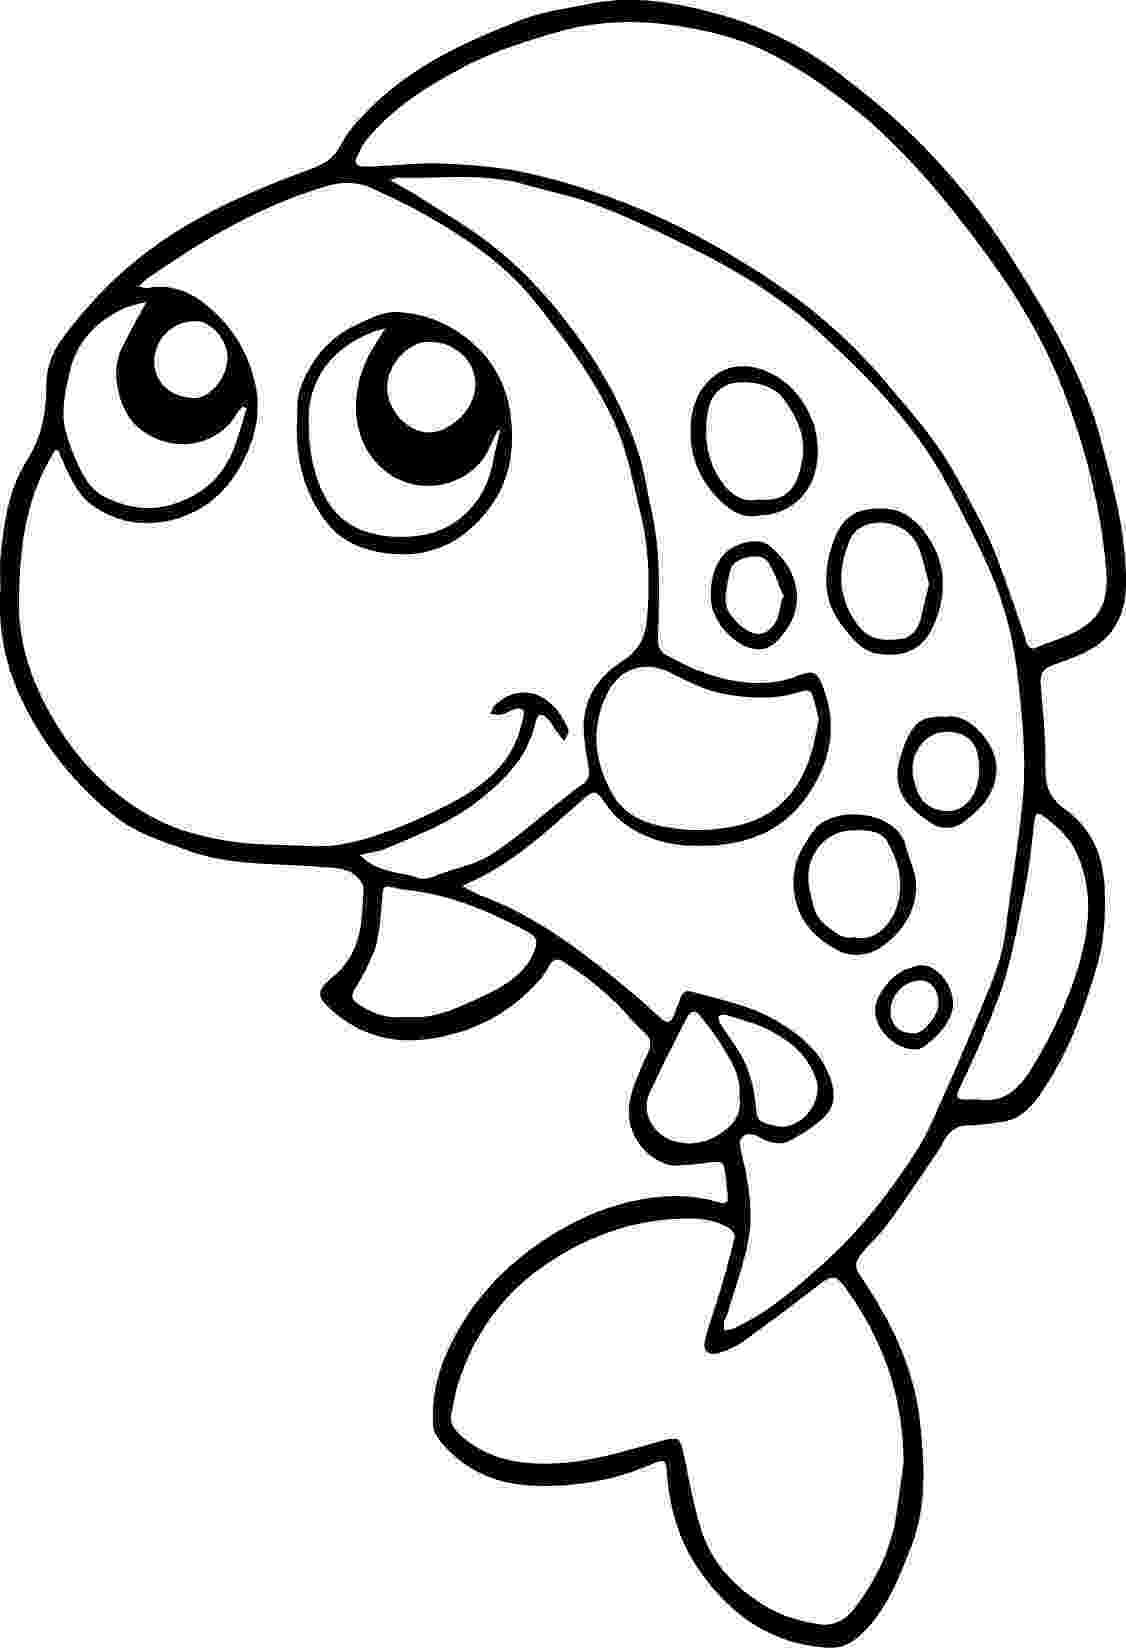 fish color page free fish coloring pages for kids gtgt disney coloring pages fish color page 